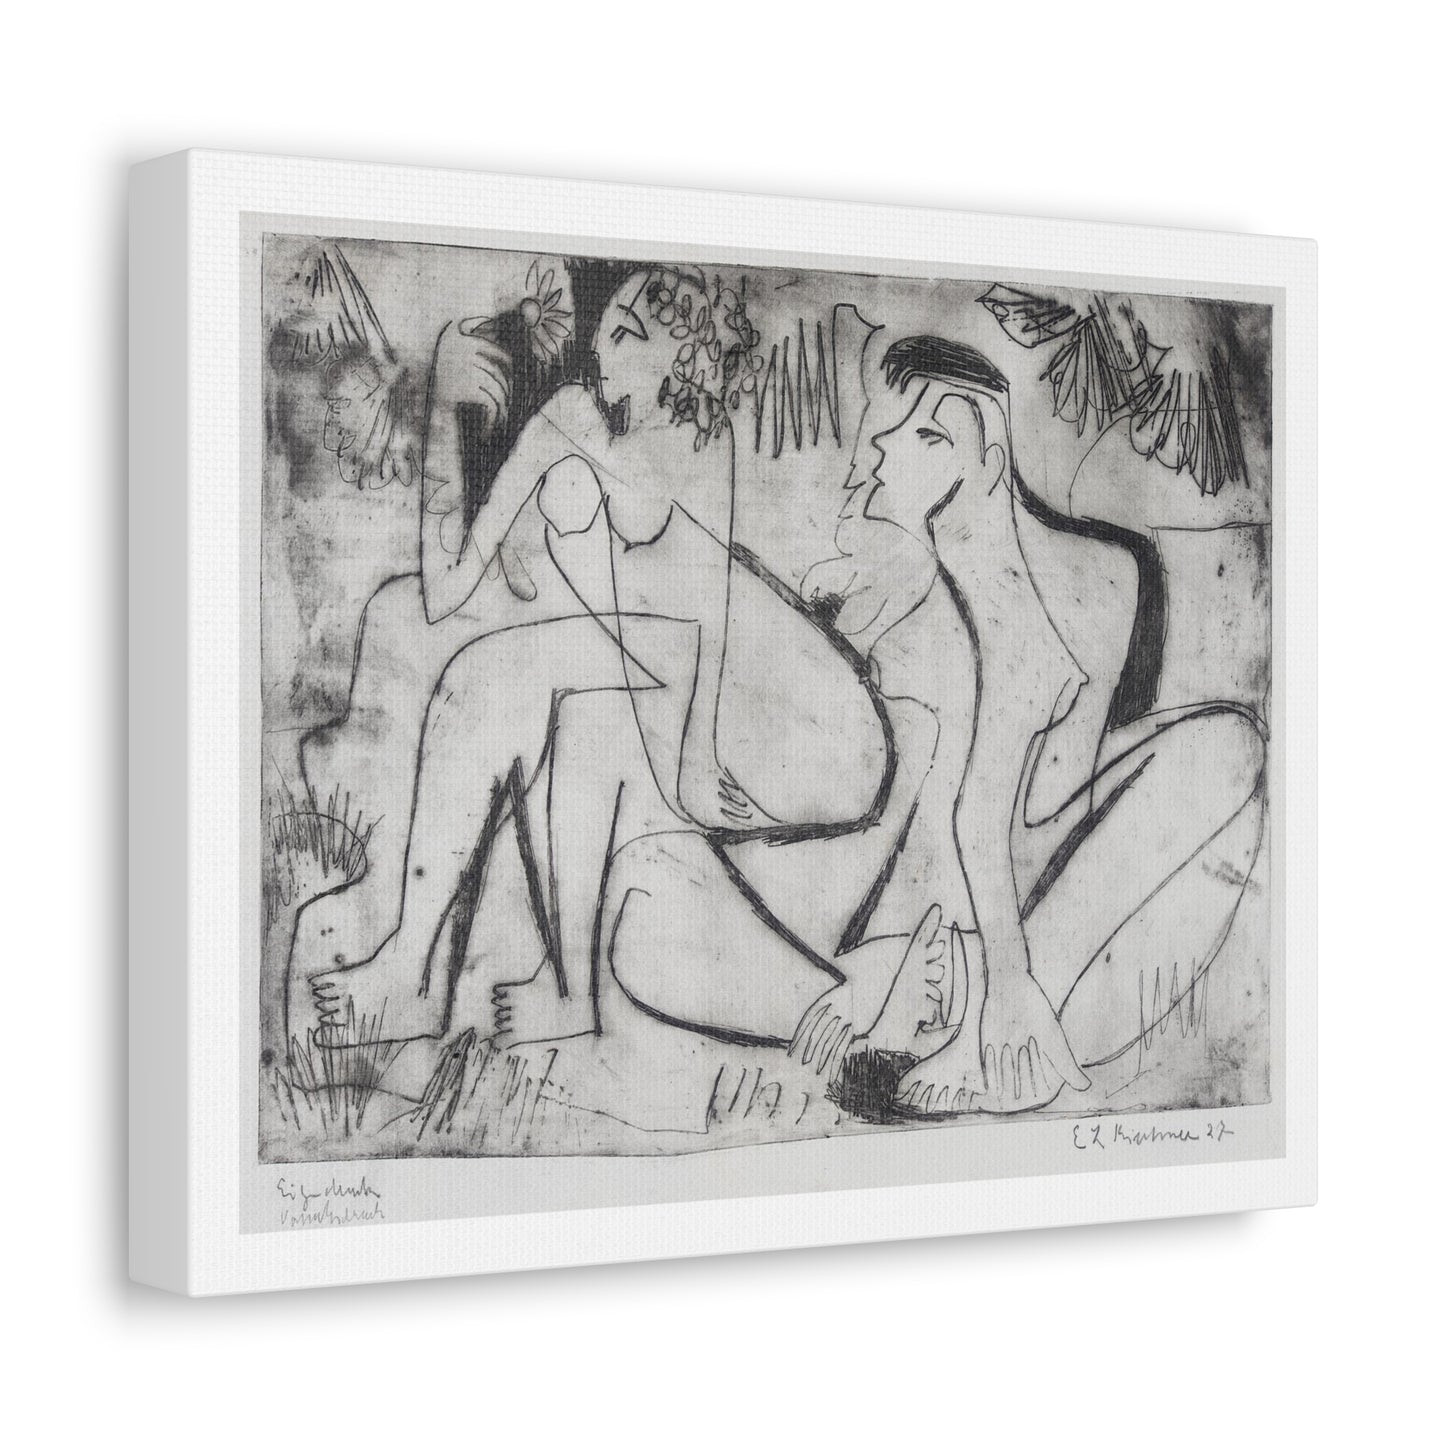 Zwei Nackte Mädchen in Freien 'Two Naked Girls Outdoors' by Ernst Ludwig Kirchner, Art Print from the Original on Canvas